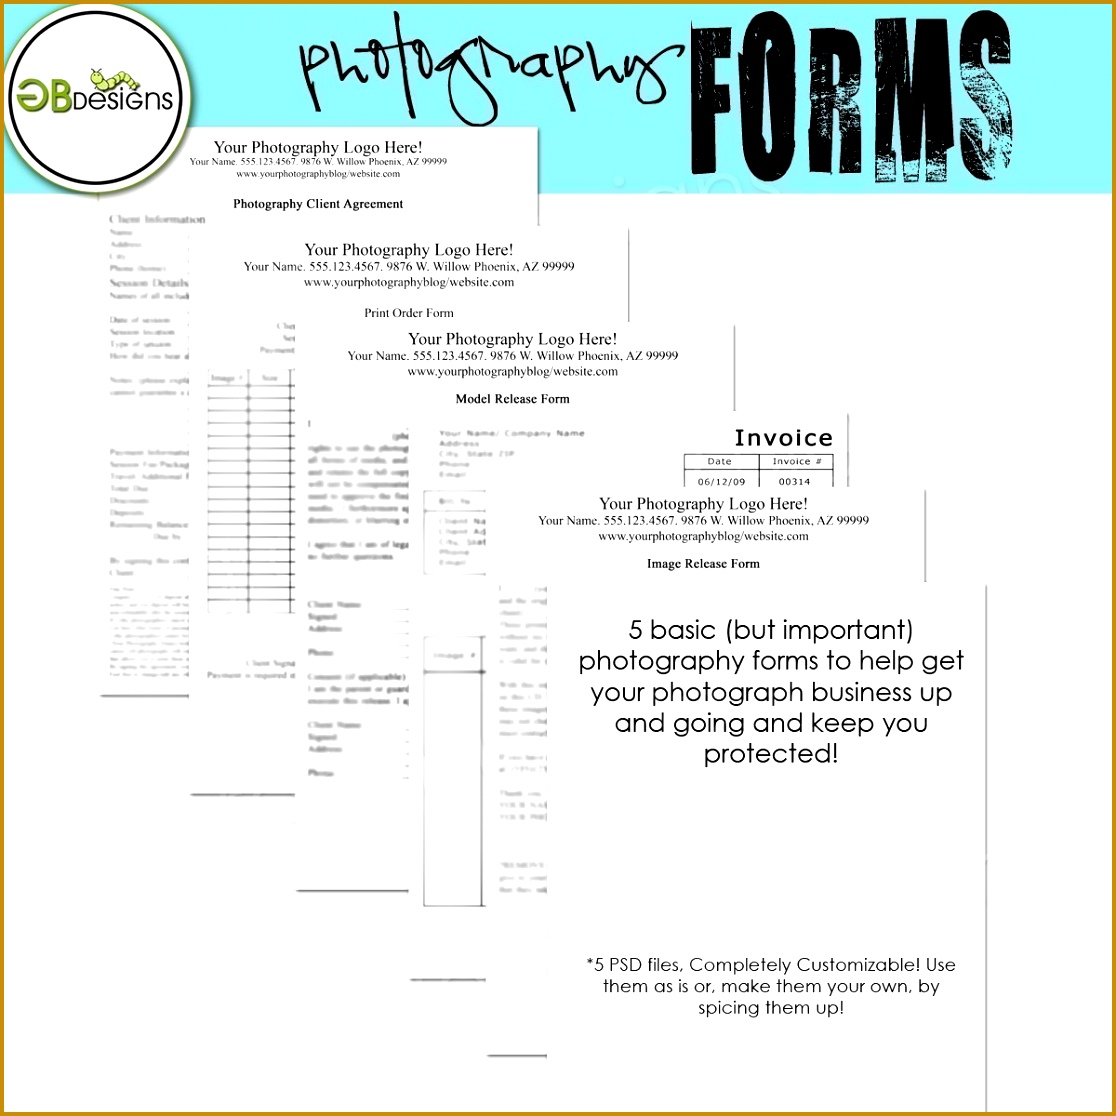 graphy Forms Templates for graphers Invoice Image Release Model Release Print Order From Client Agreement 11161116